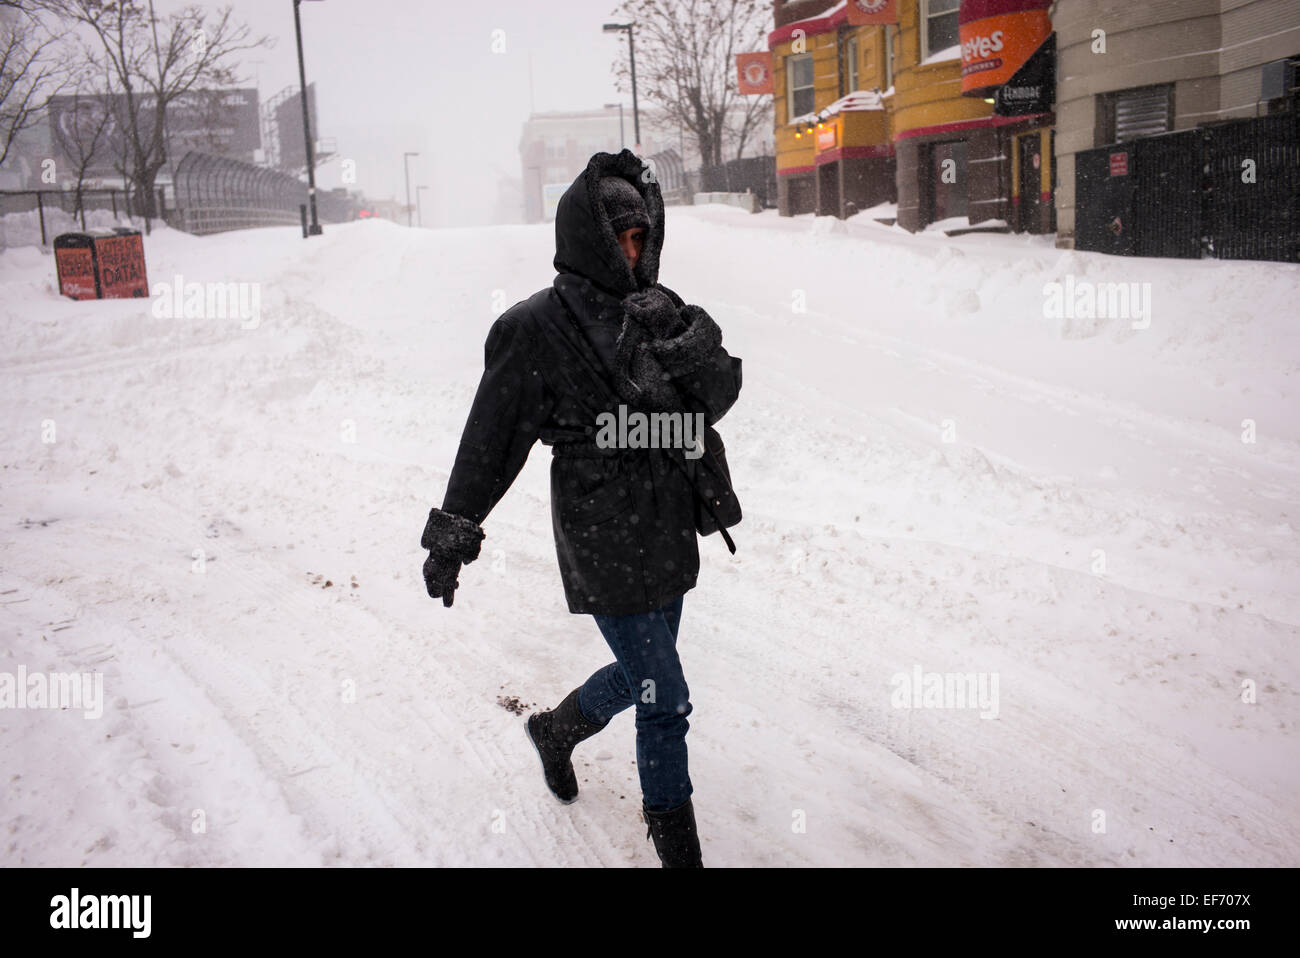 A woman walks near Kenmore Square during a severe snow storm in Boston, Massachusetts. The city was shut down for a day. Stock Photo